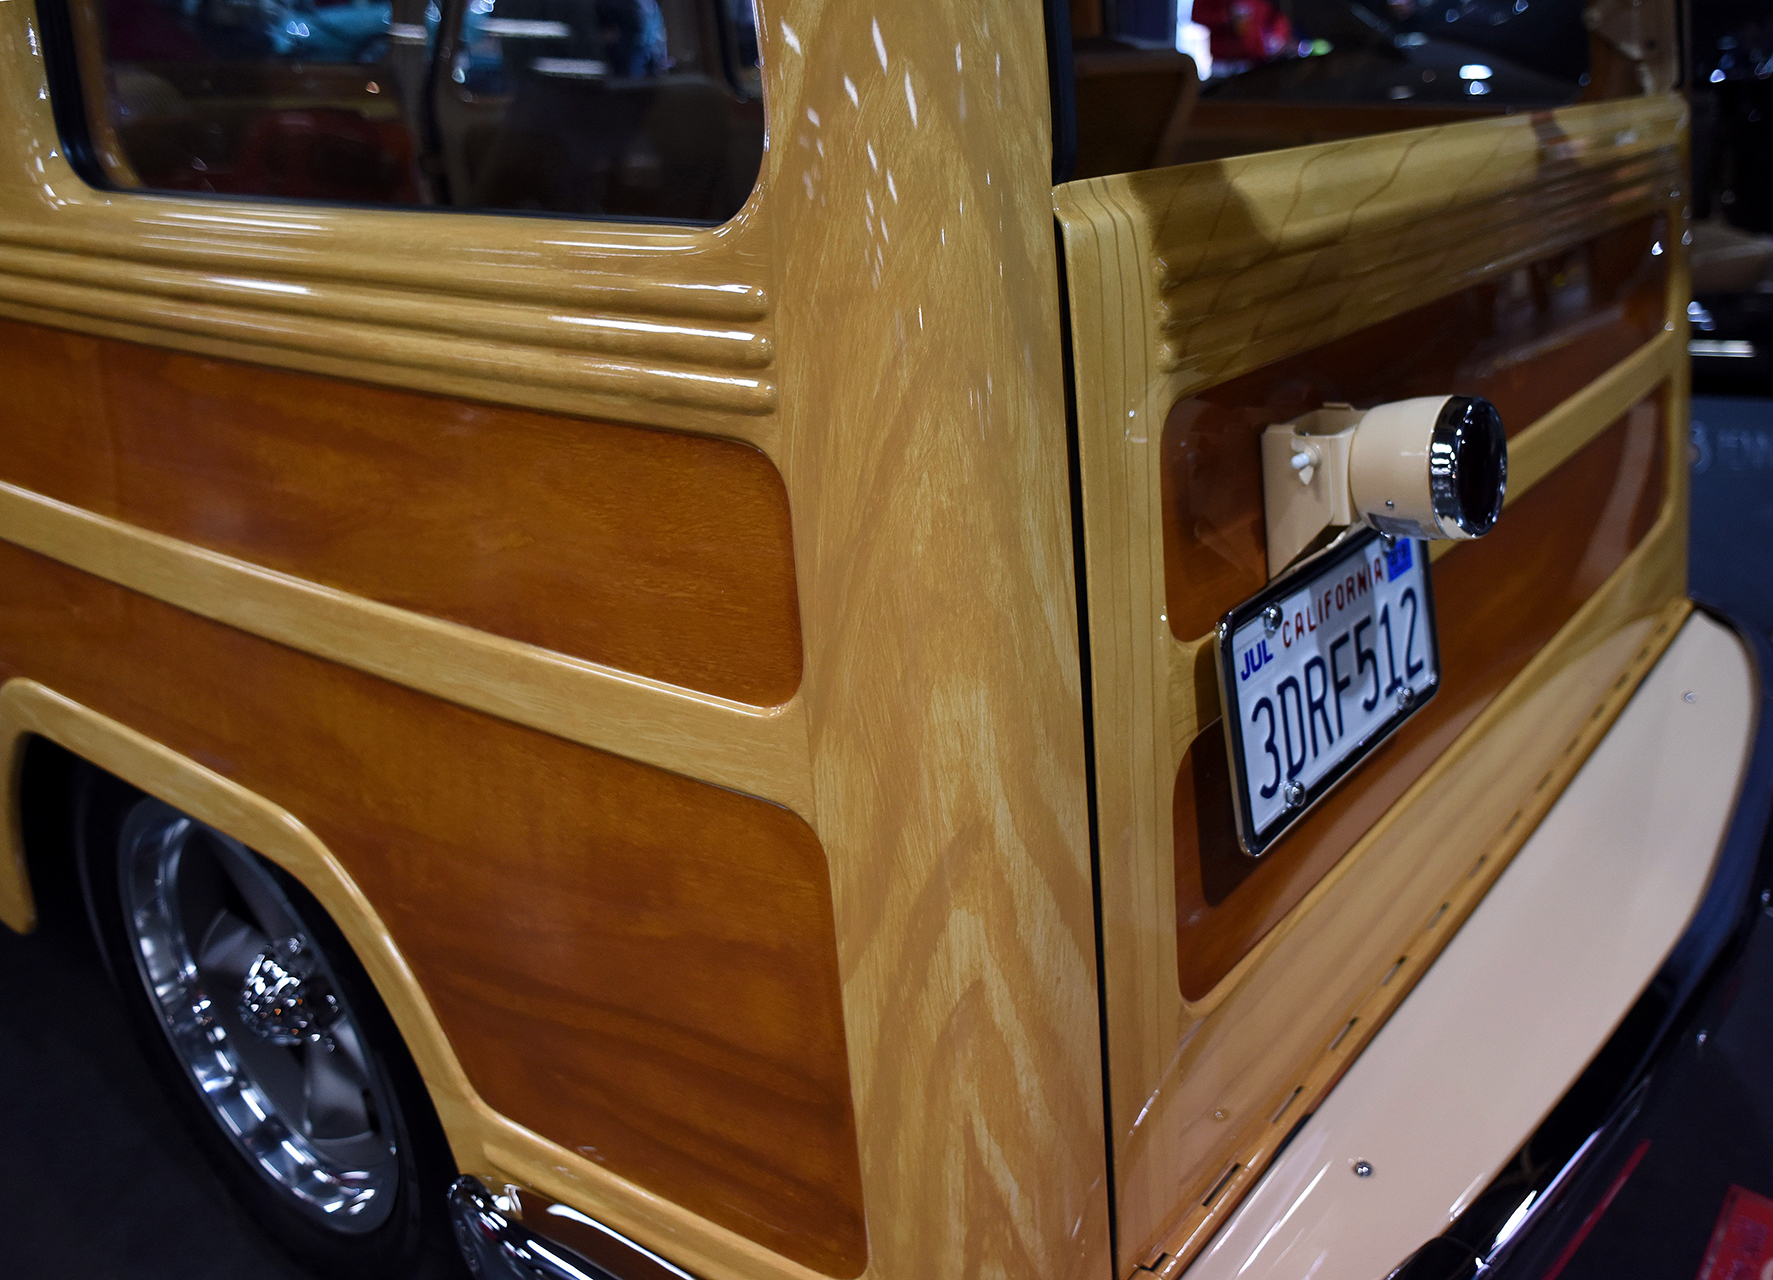  The Willys had a steel body made to look like a woody. Wilky hand painted the amazing wood grain. Looks just like Ash paneling. 